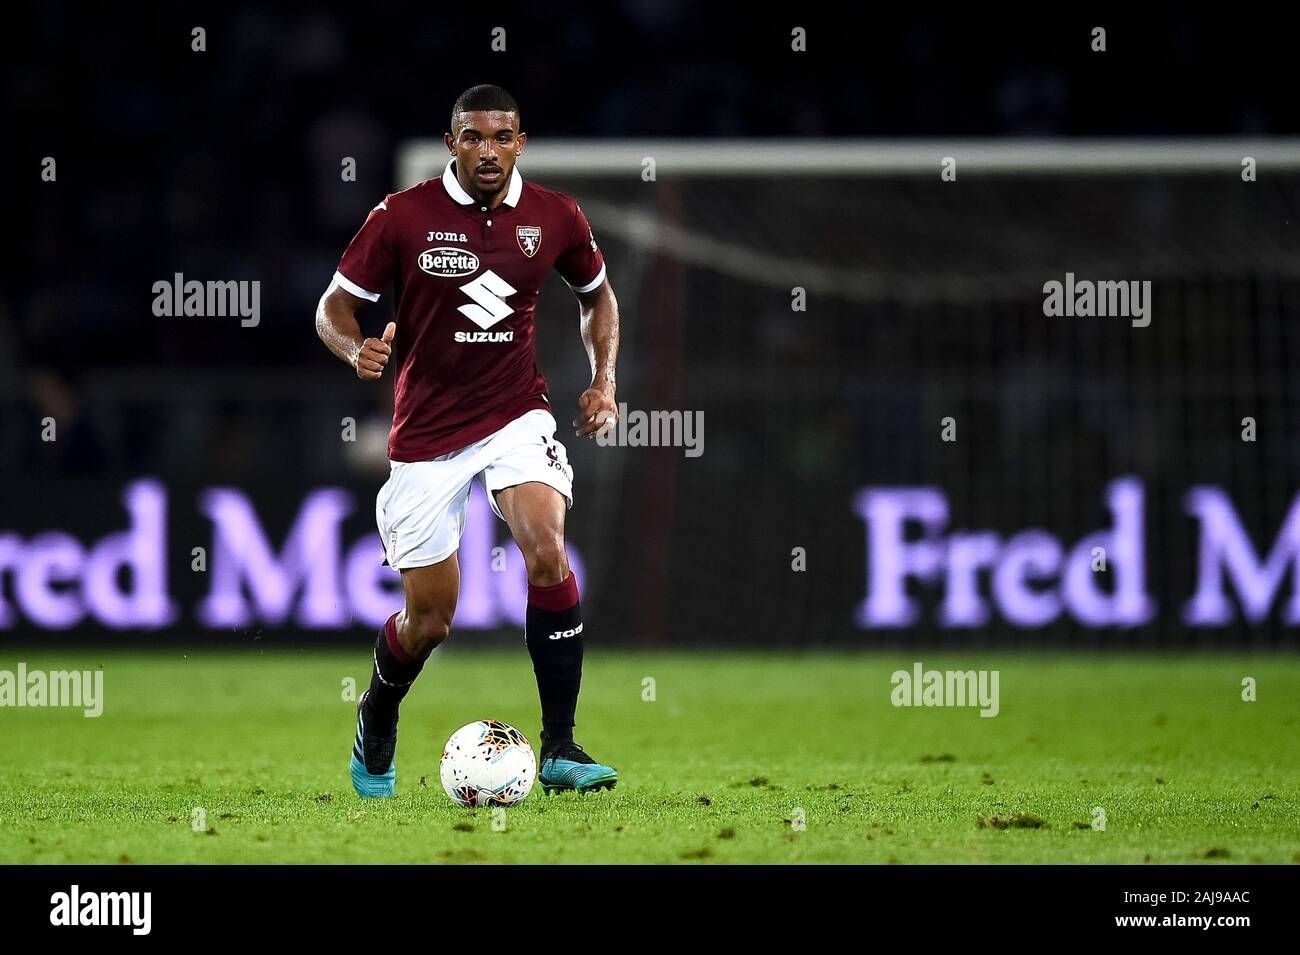 Turin, Italy. 22 August, 2019: Gleison Bremer of Torino FC in action during the UEFA Europa League playoff football match between Torino FC and Wolverhampton Wanderers FC. Wolverhampton Wanderers FC won 3-2 over Torino FC. Credit: Nicolò Campo/Alamy Live News Stock Photo